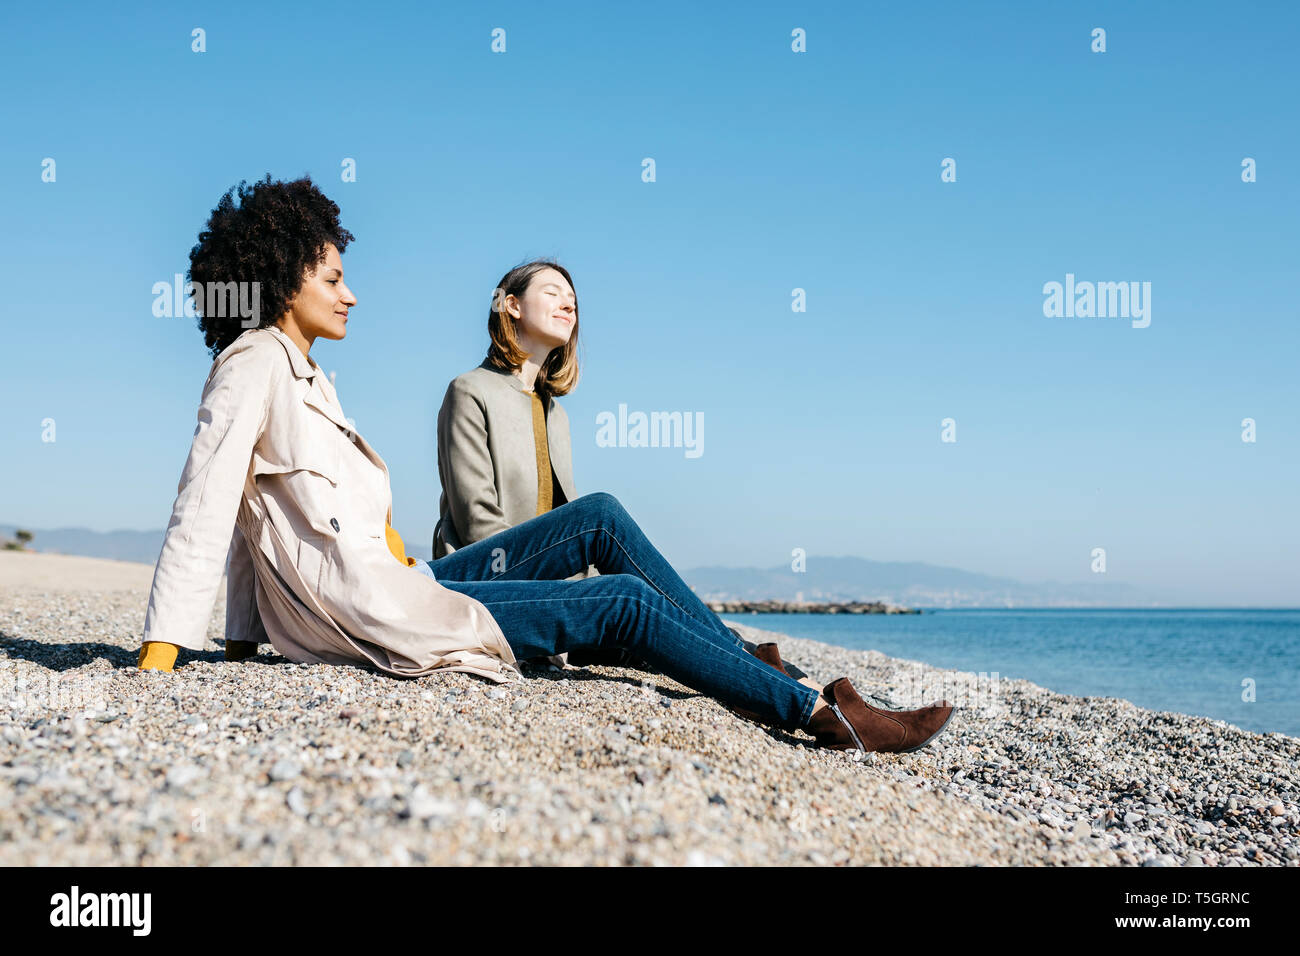 Two friends sitting on the beach enjoying leisure time Stock Photo